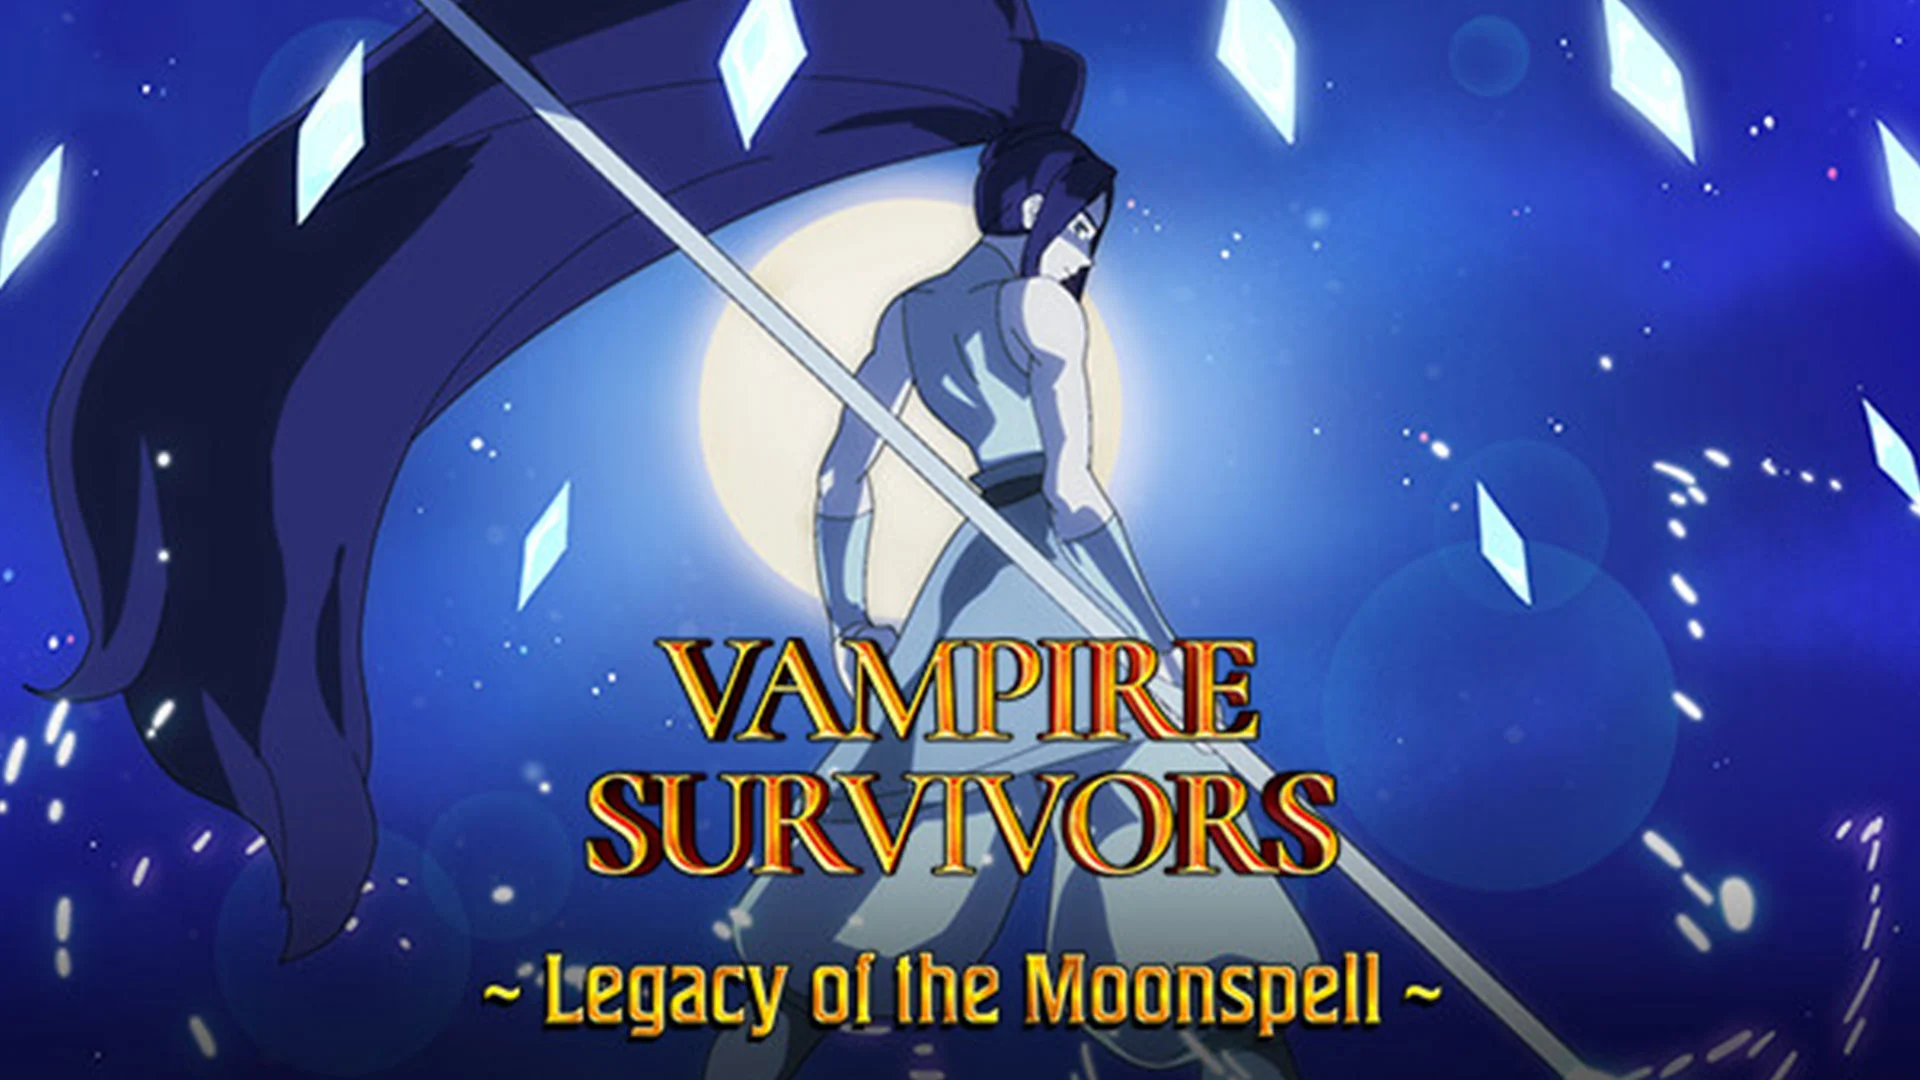 Vampire Survivors Legacy of the Moonspell DLC Announced for Dec. 15